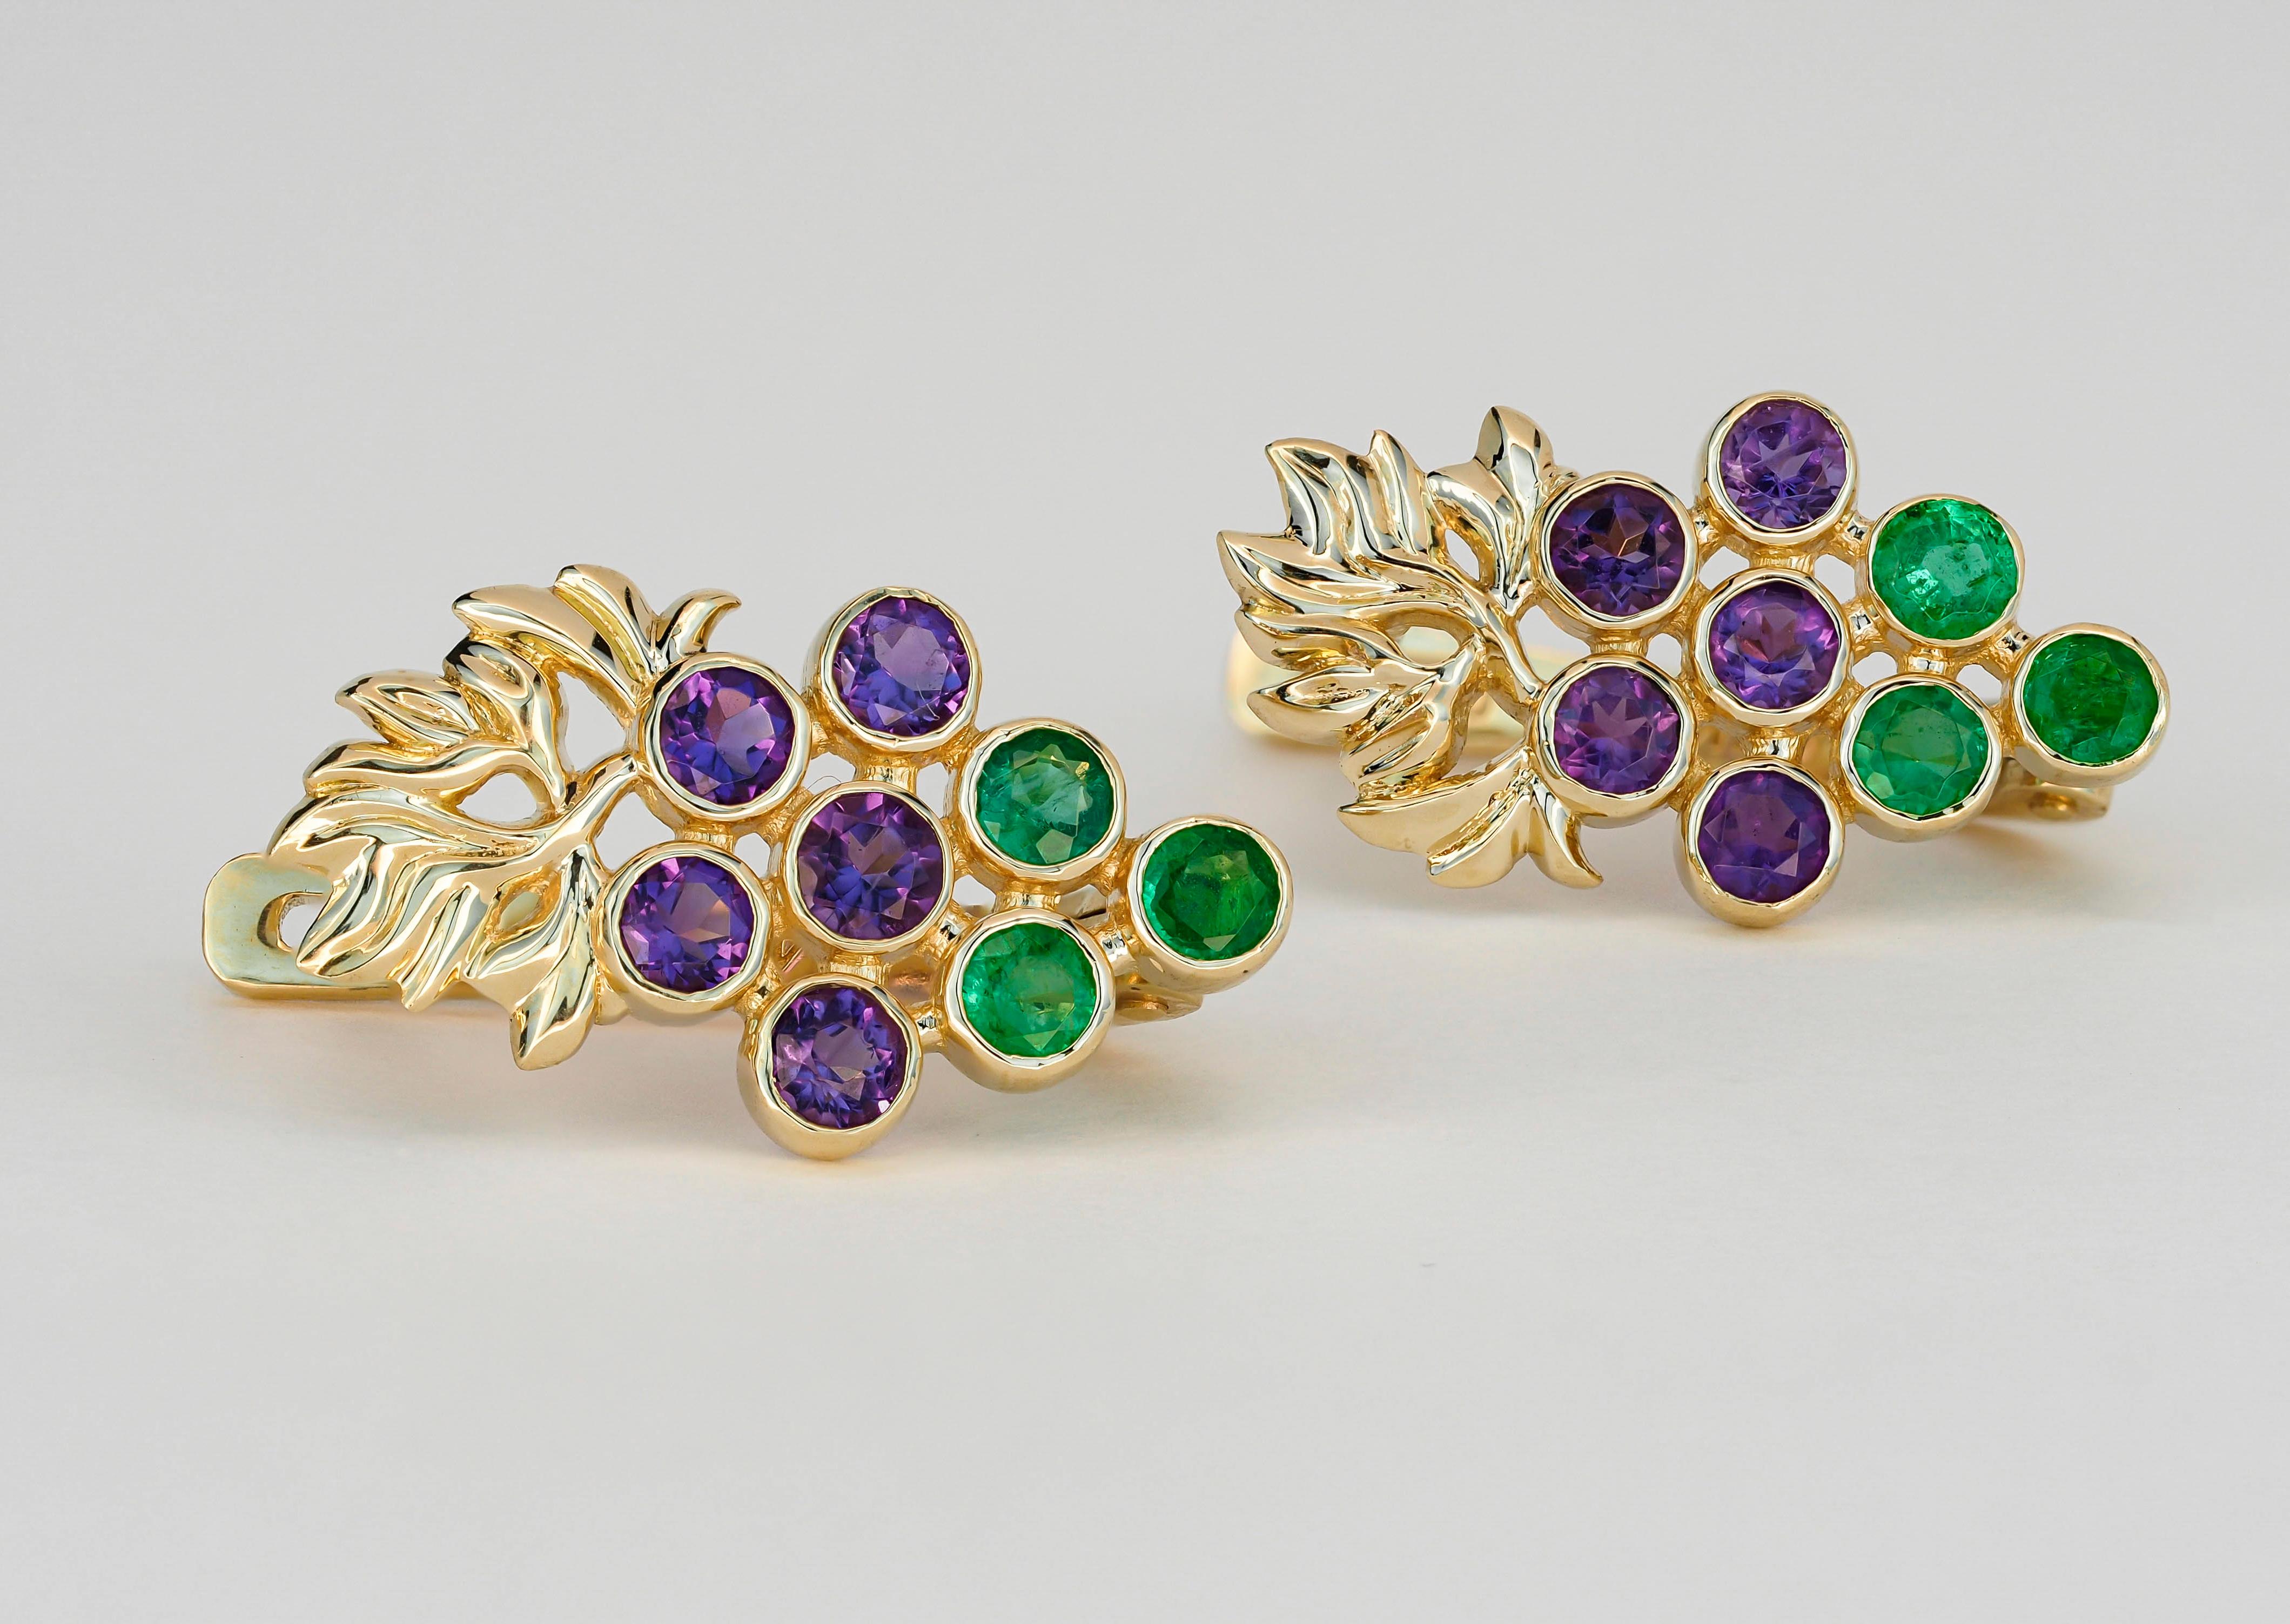 14 kt solid gold earrings with natural emeralds and amethysts. Grape design earrings. May birthstone. February birthstone.
Weight: 3.1 g. 
Size:17.5 x 10 mm.
14k gold - tested 
Gemstones:
Natural emeralds: 6 pieces, color - green
Round cut, weight -